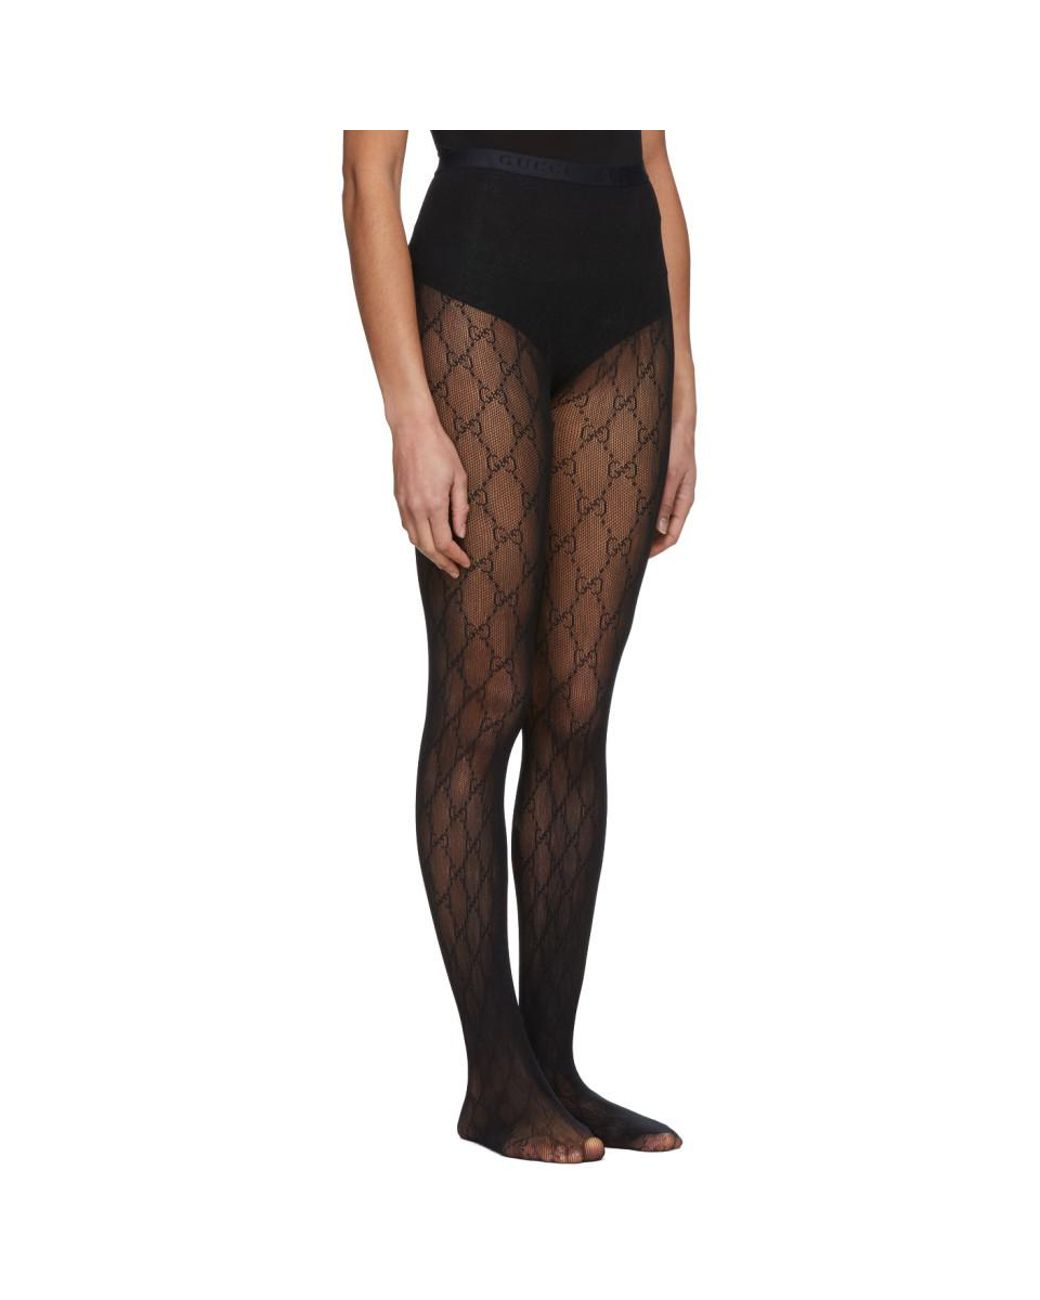 GUCCI Black GG Supreme Tights  Stockings outfit, Black stockings